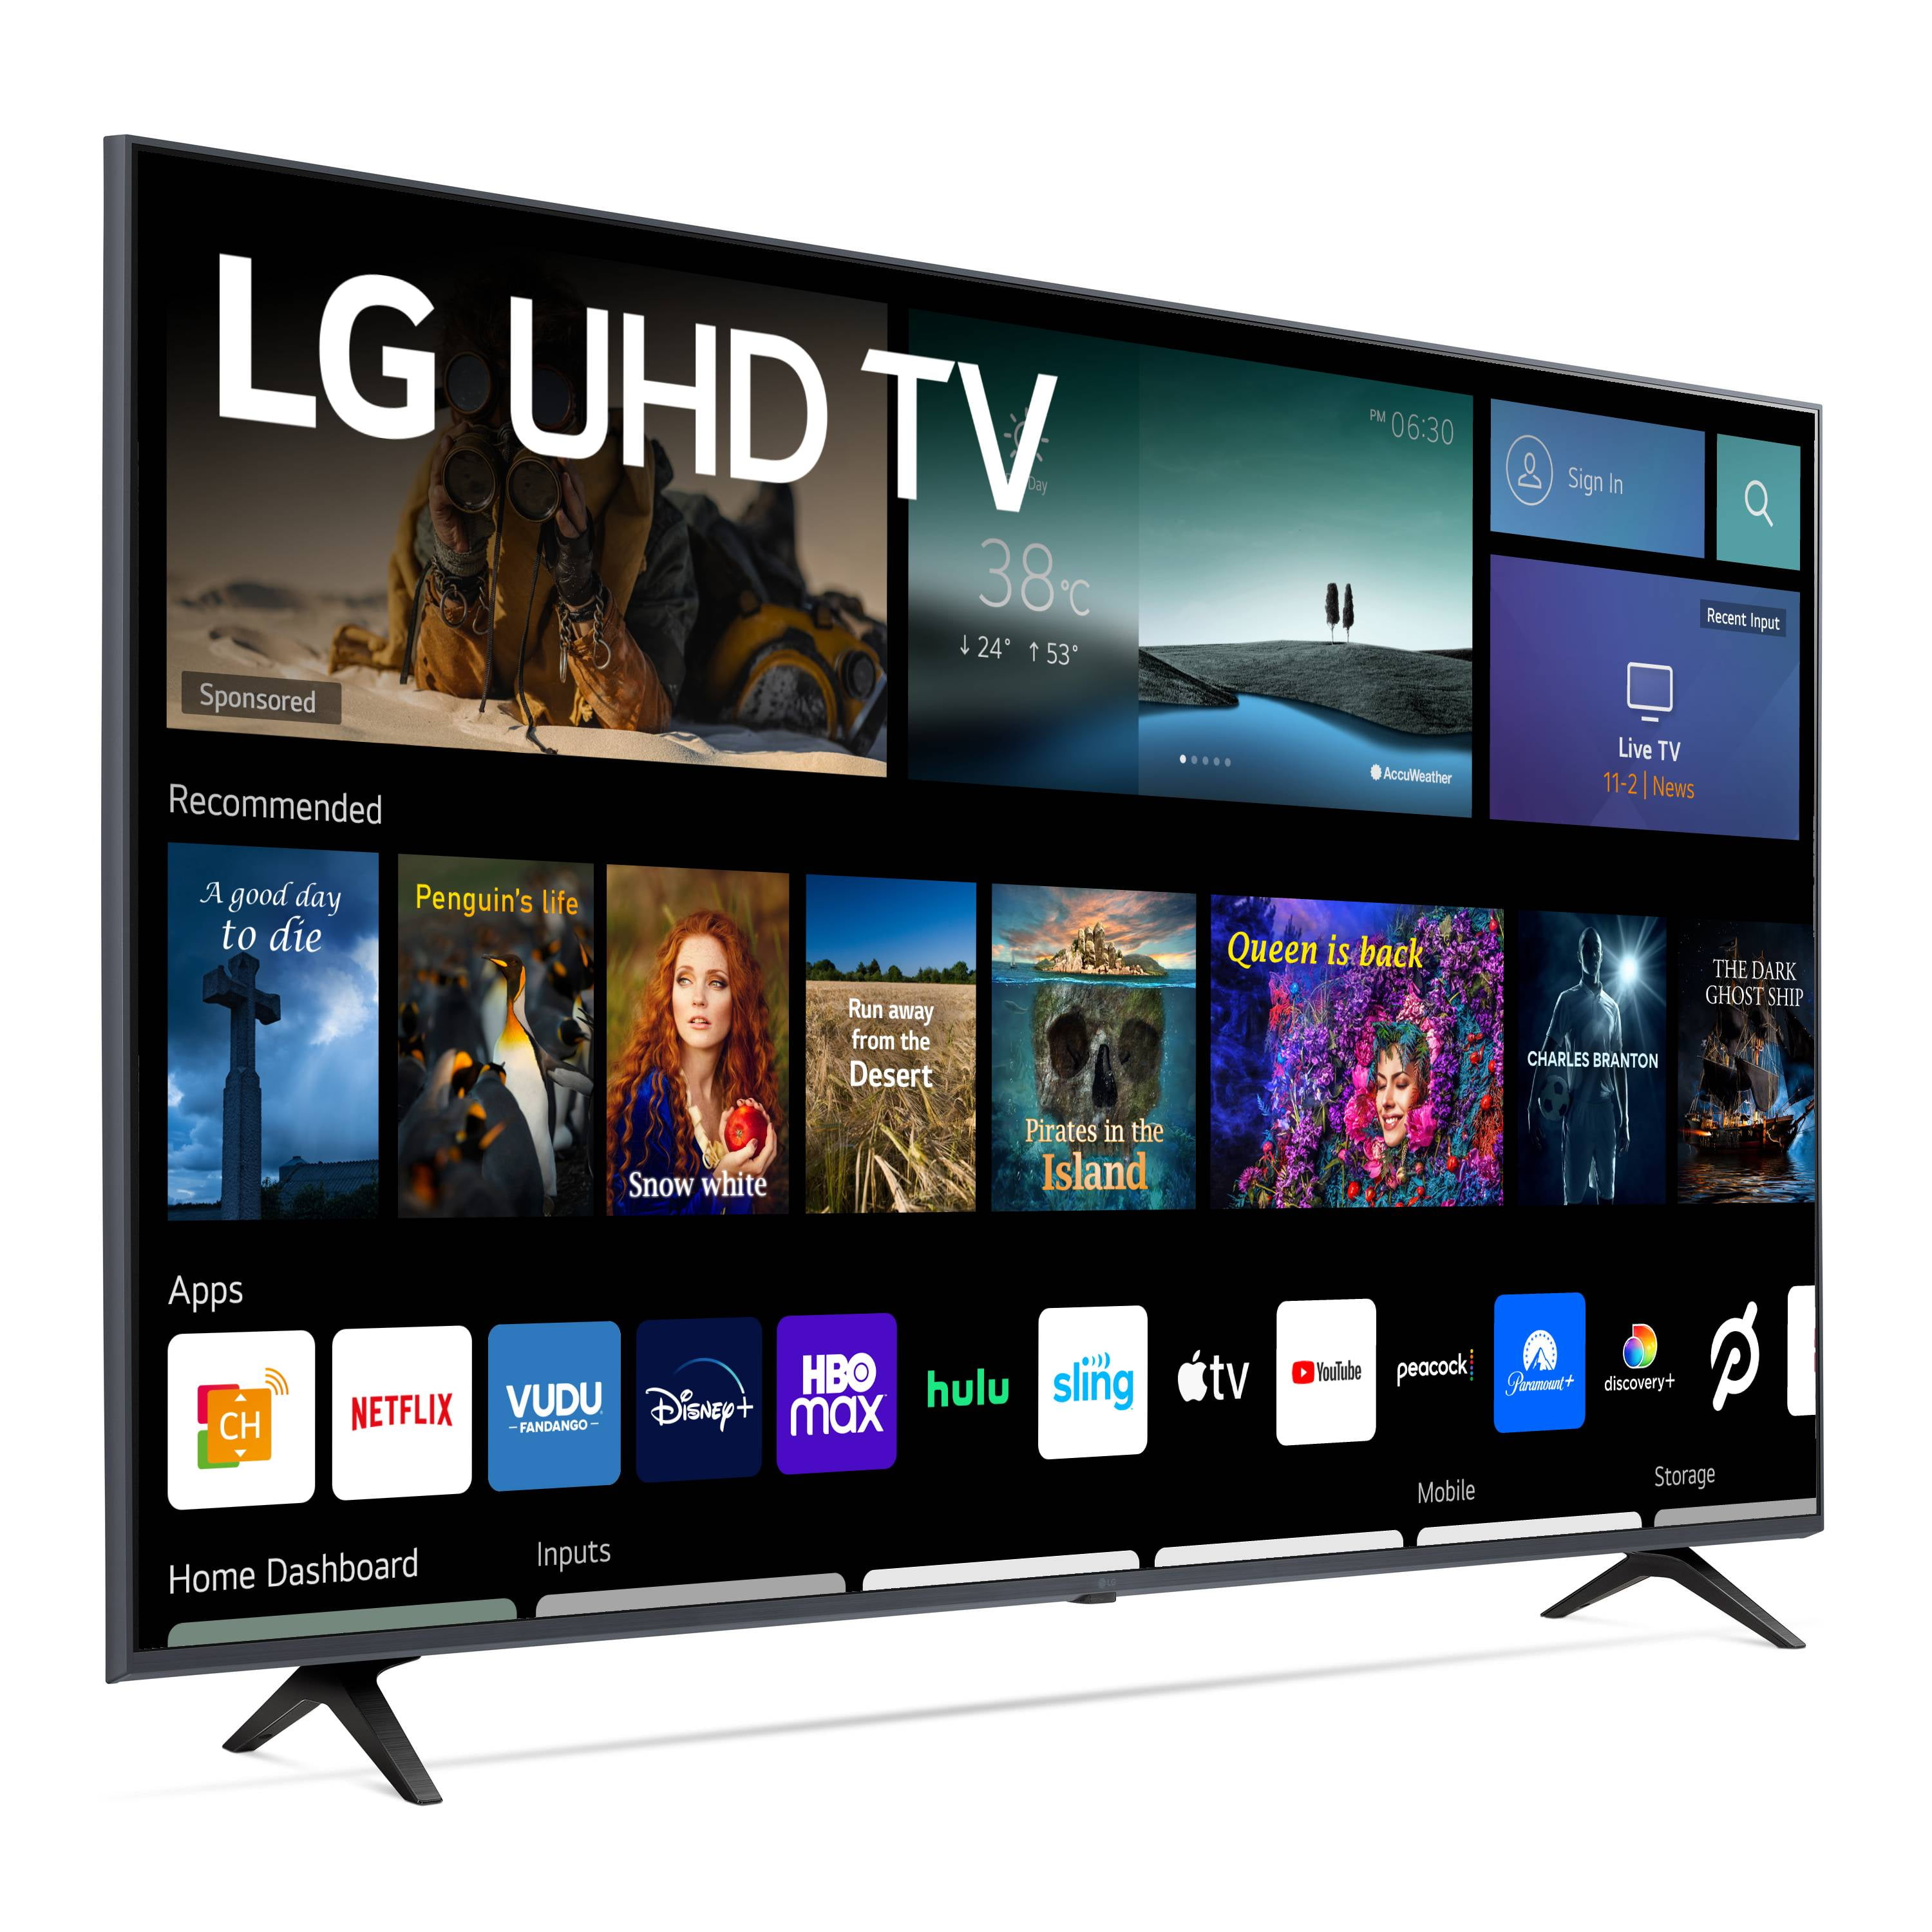 Executives From LG, Samsung & Vizio Weigh In; The Role Of Smart TVs With  Advertisers And Audience Measurement